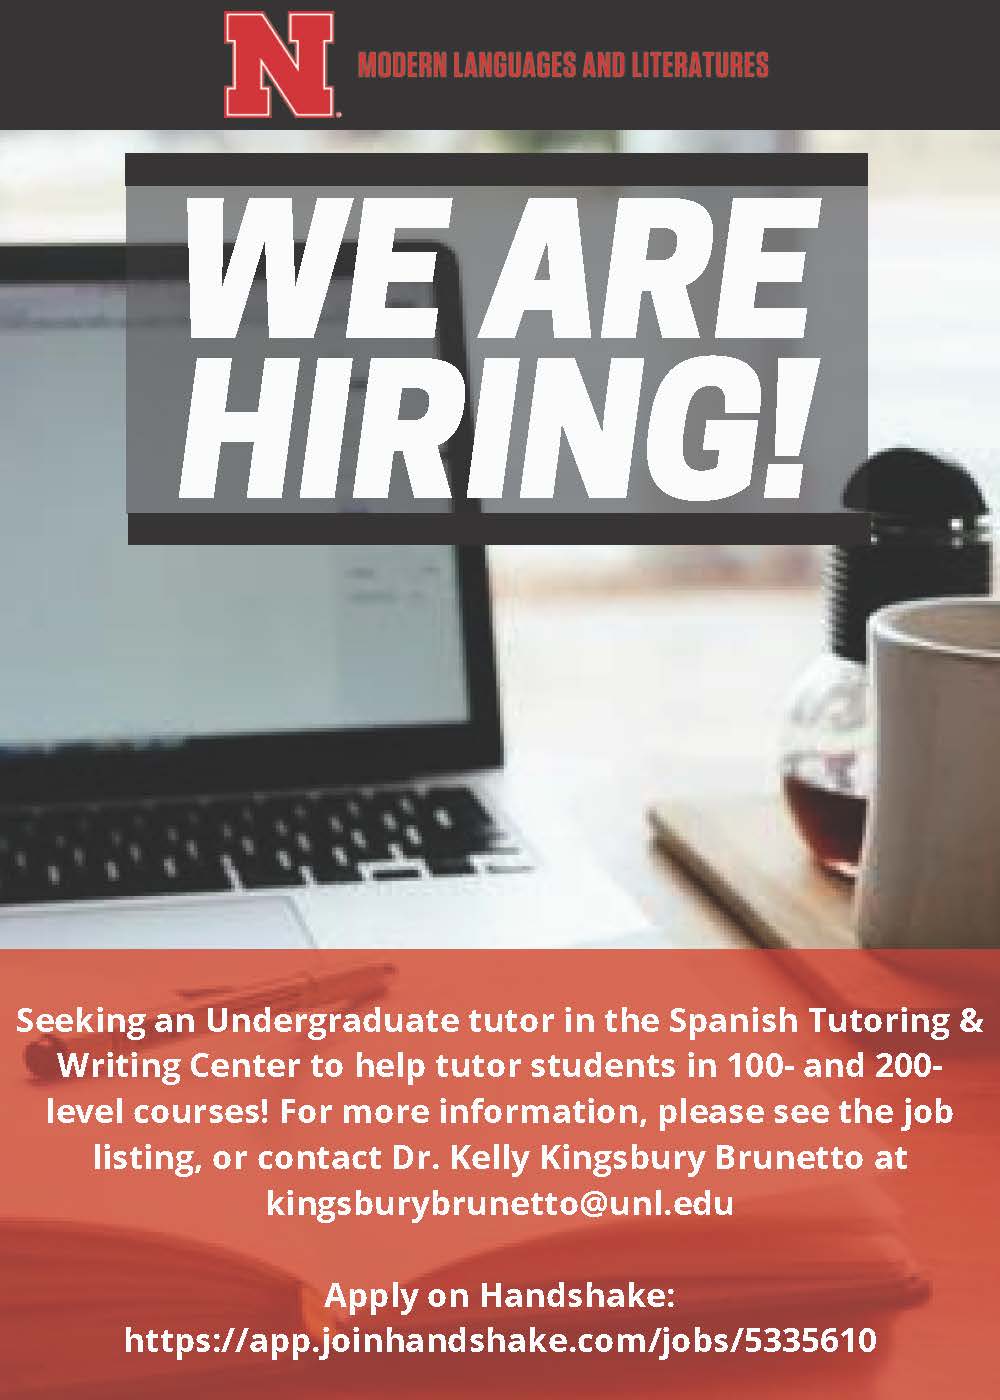 Apply to be a Spanish Tutor!